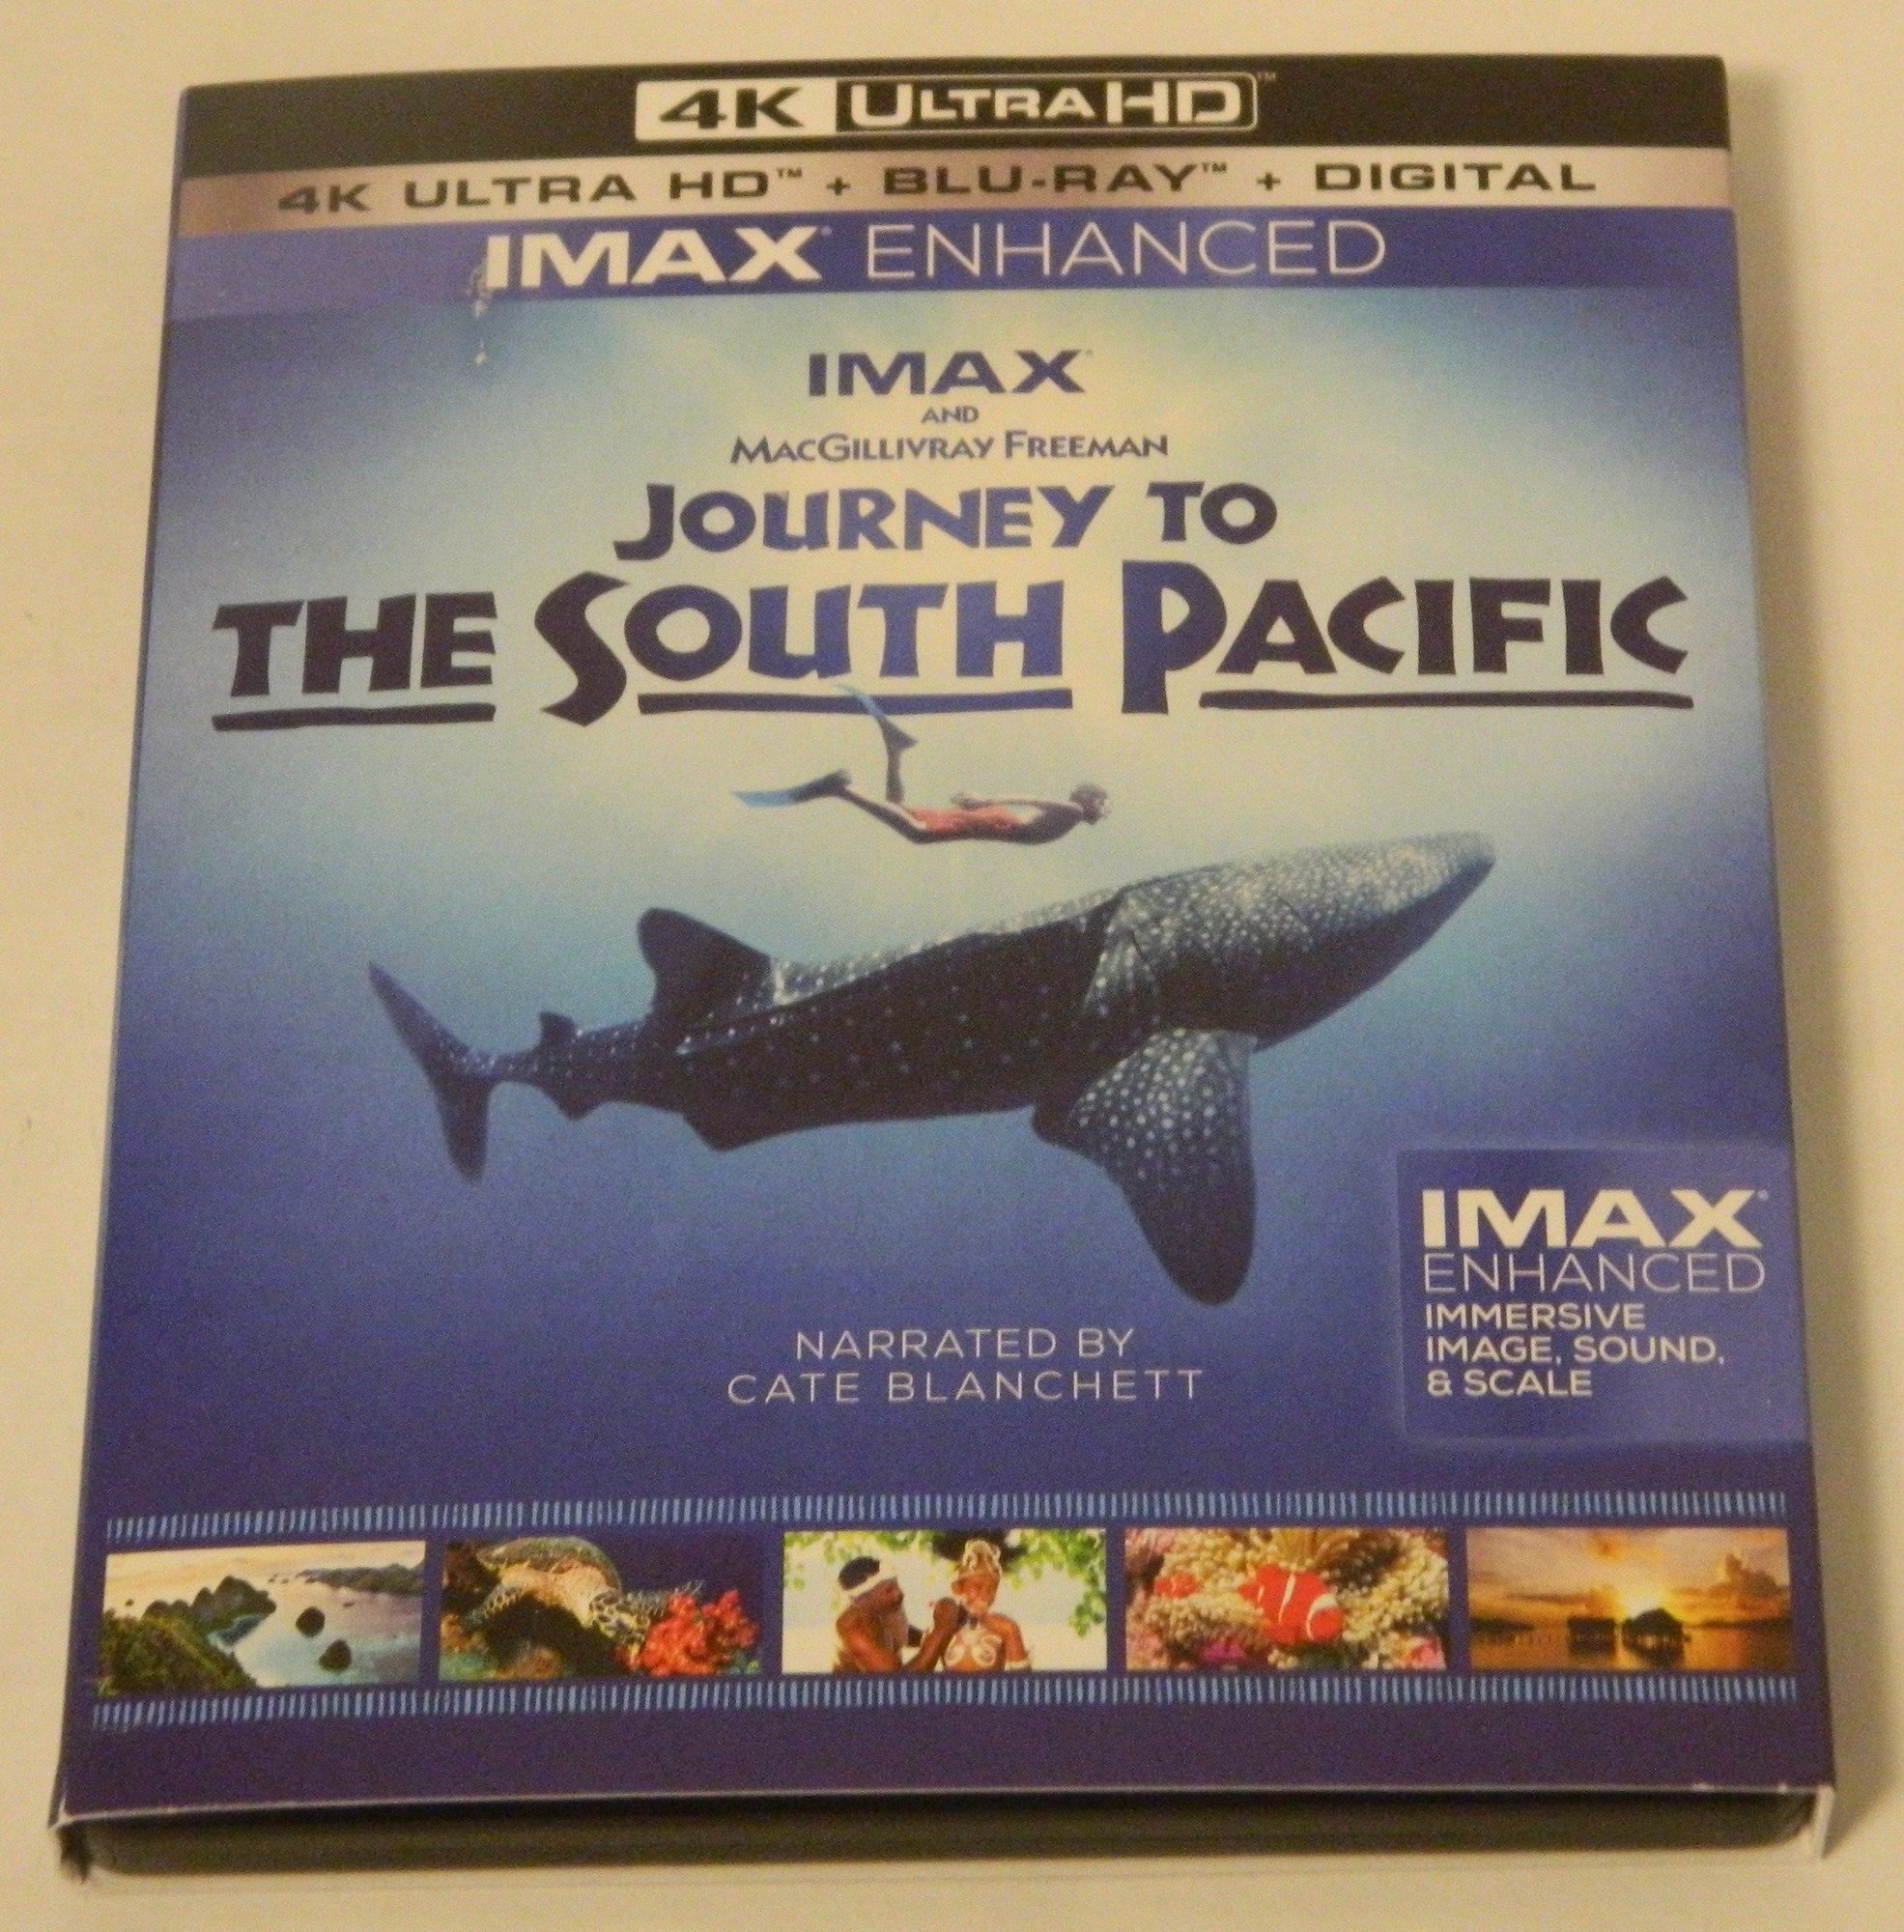 Journey to the South Pacific 4K Ultra HD/Blu-ray Review